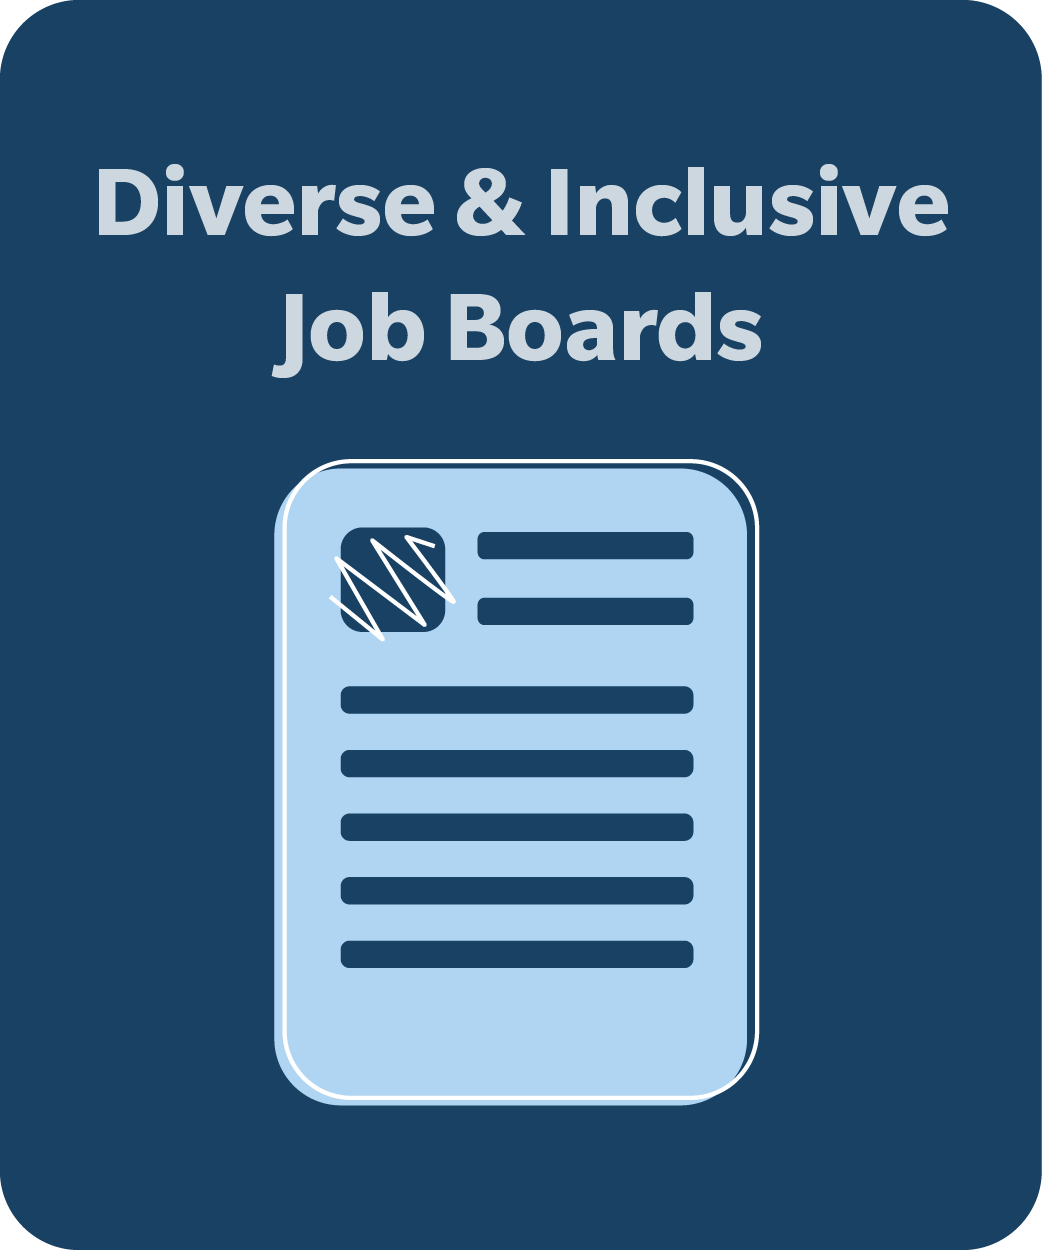 Diverse and Inclusive Job Boards with an illustration of a job bulletin